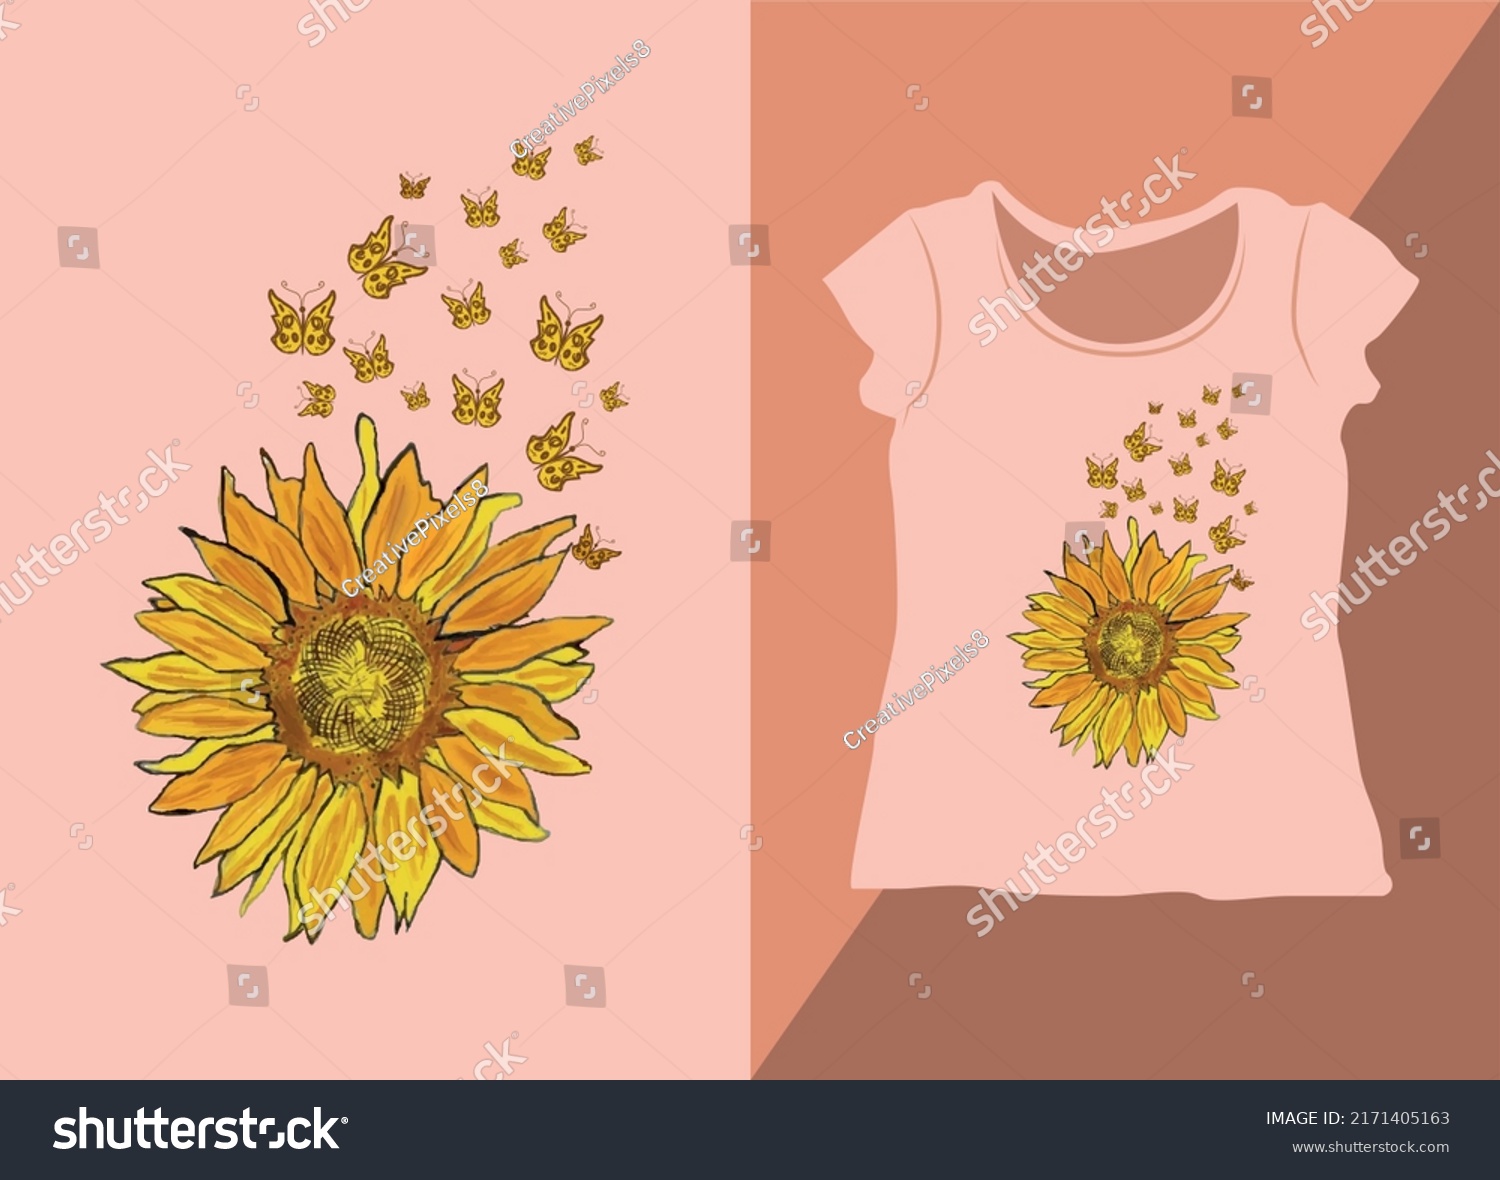 Hand Drawn Sunflower Butterfly Illustration Sunflower Stock Vector Royalty Free 2171405163 